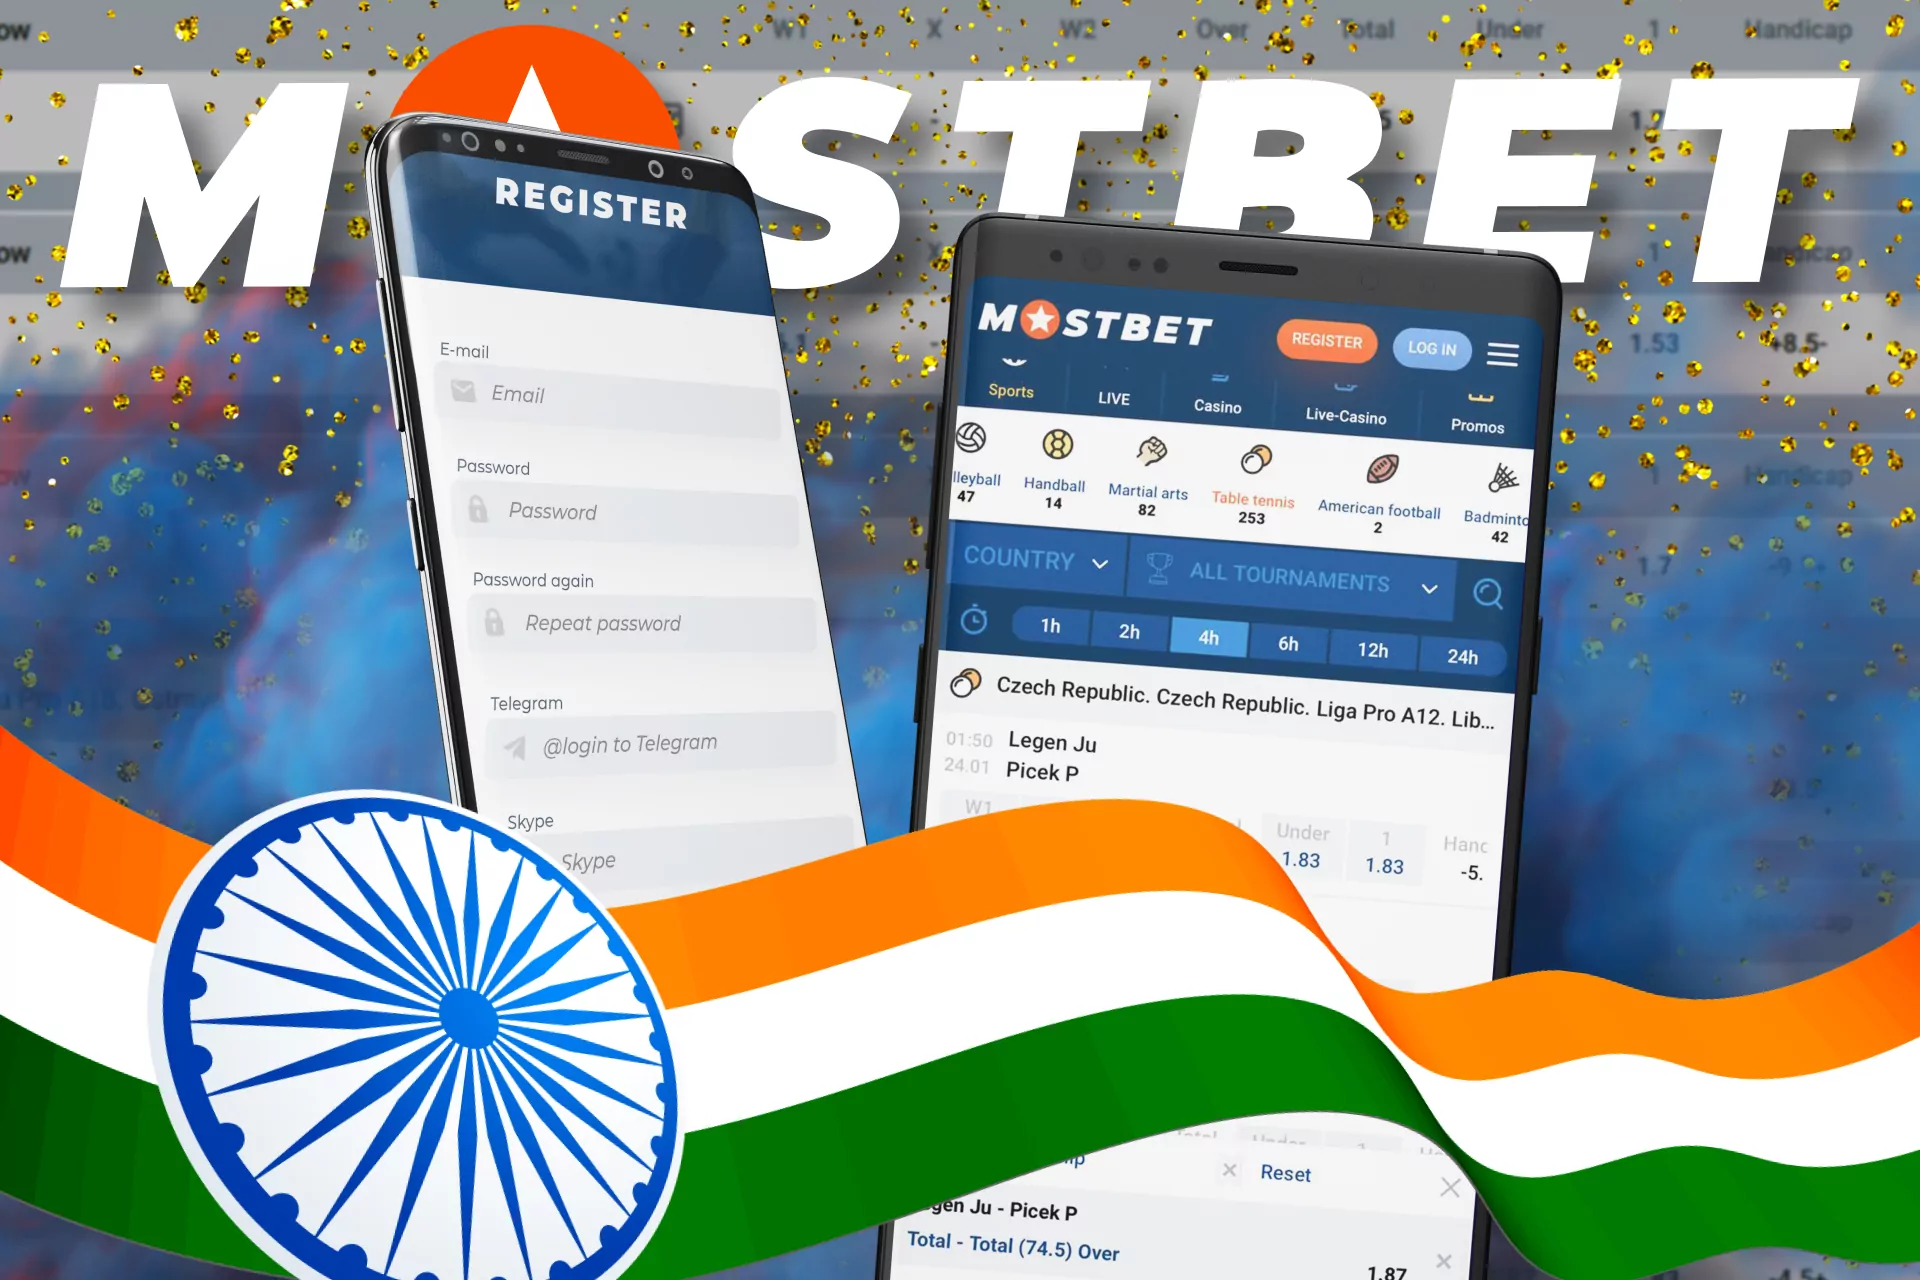 Mostbet offers its users the mobile version of the app from India a lot of benefits.